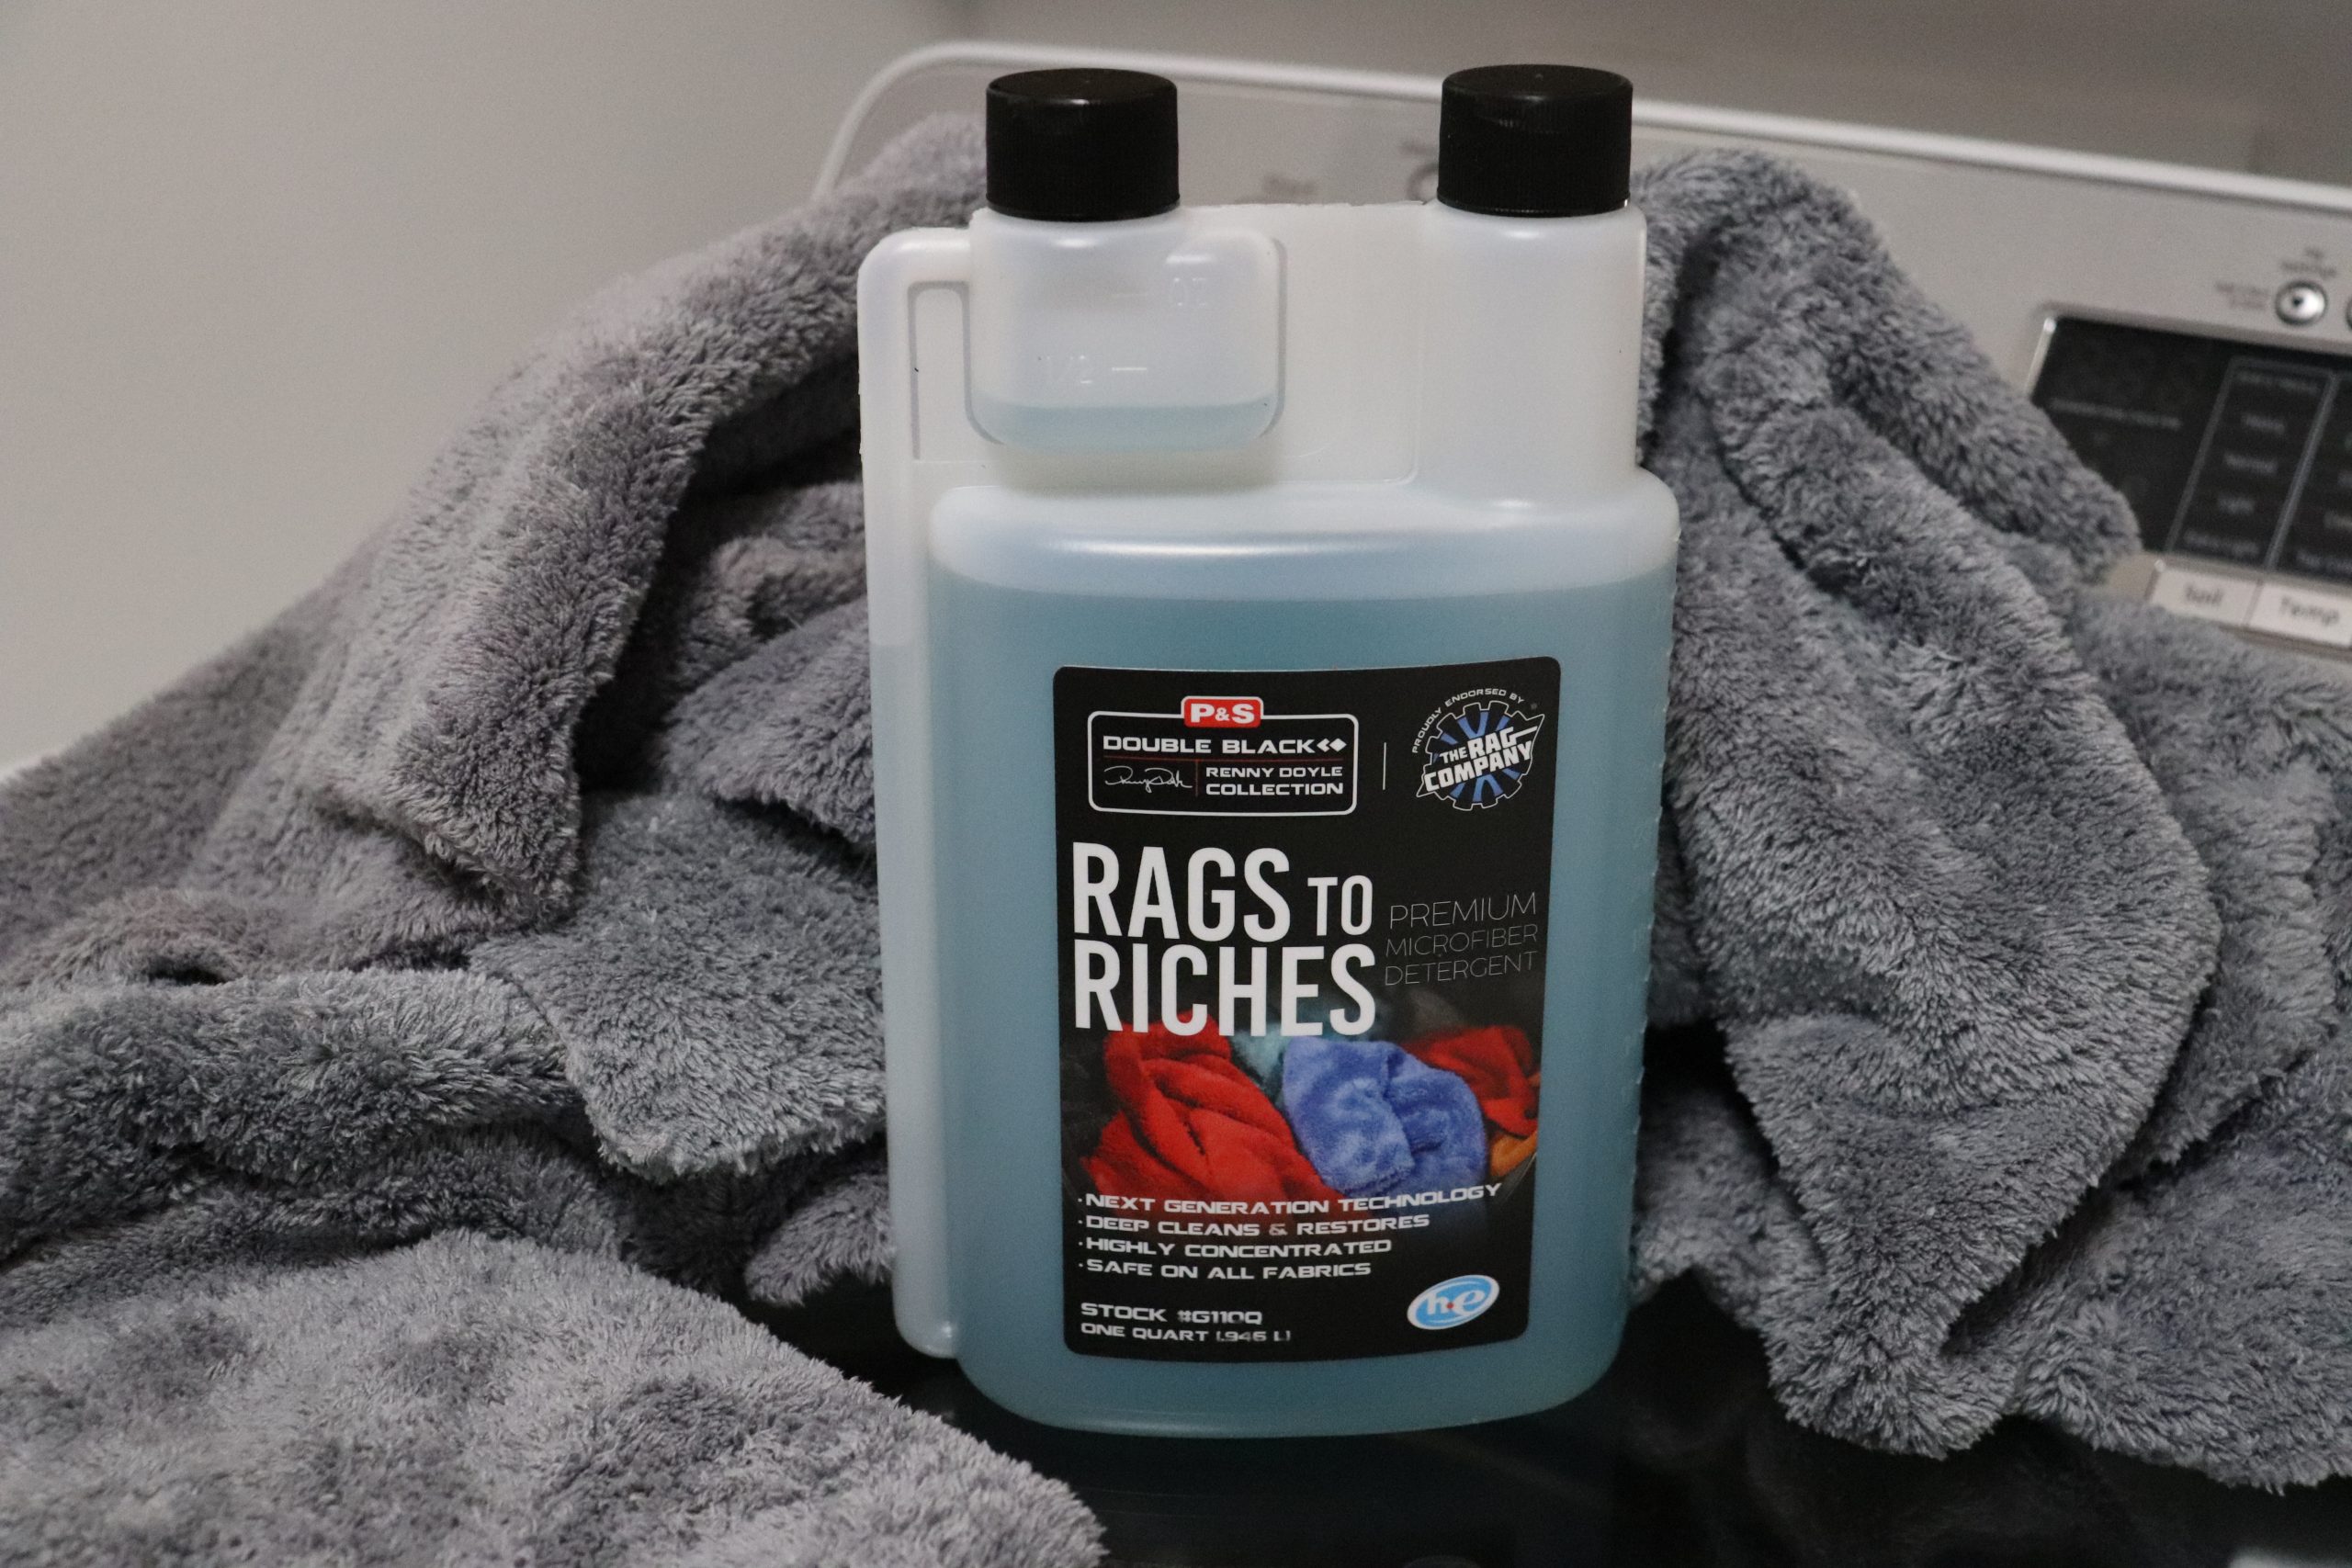 Product Review: P&S Rags to Riches Premium Microfiber Detergent – Ask a Pro  Blog